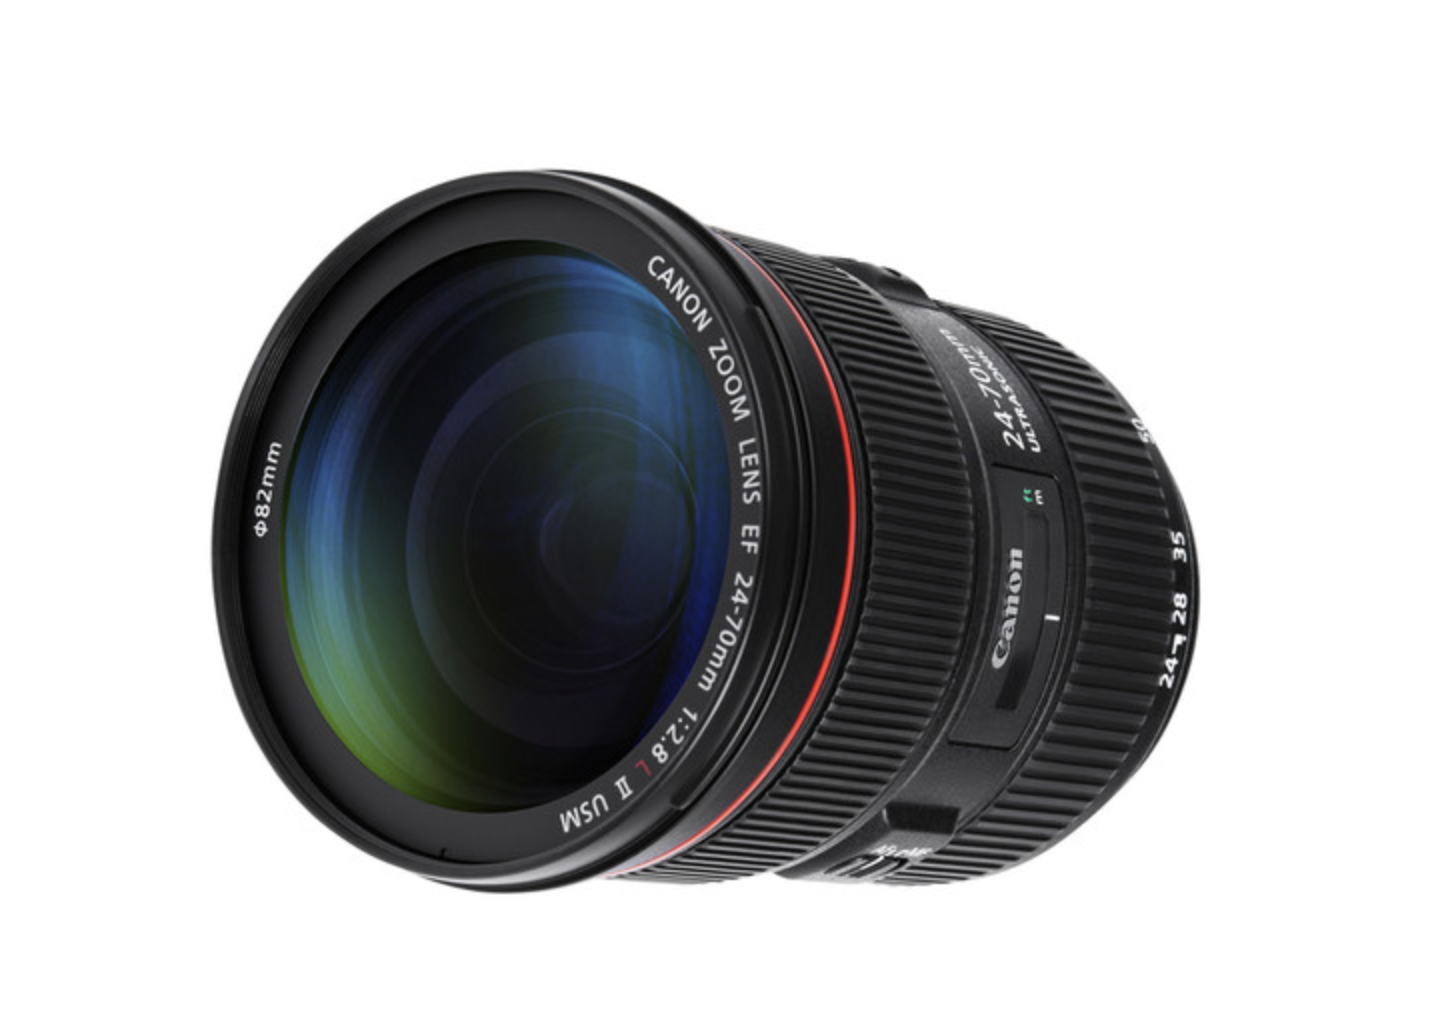 Canon EF 24-70mm f/2.8 L II USM Lens for wedding photography